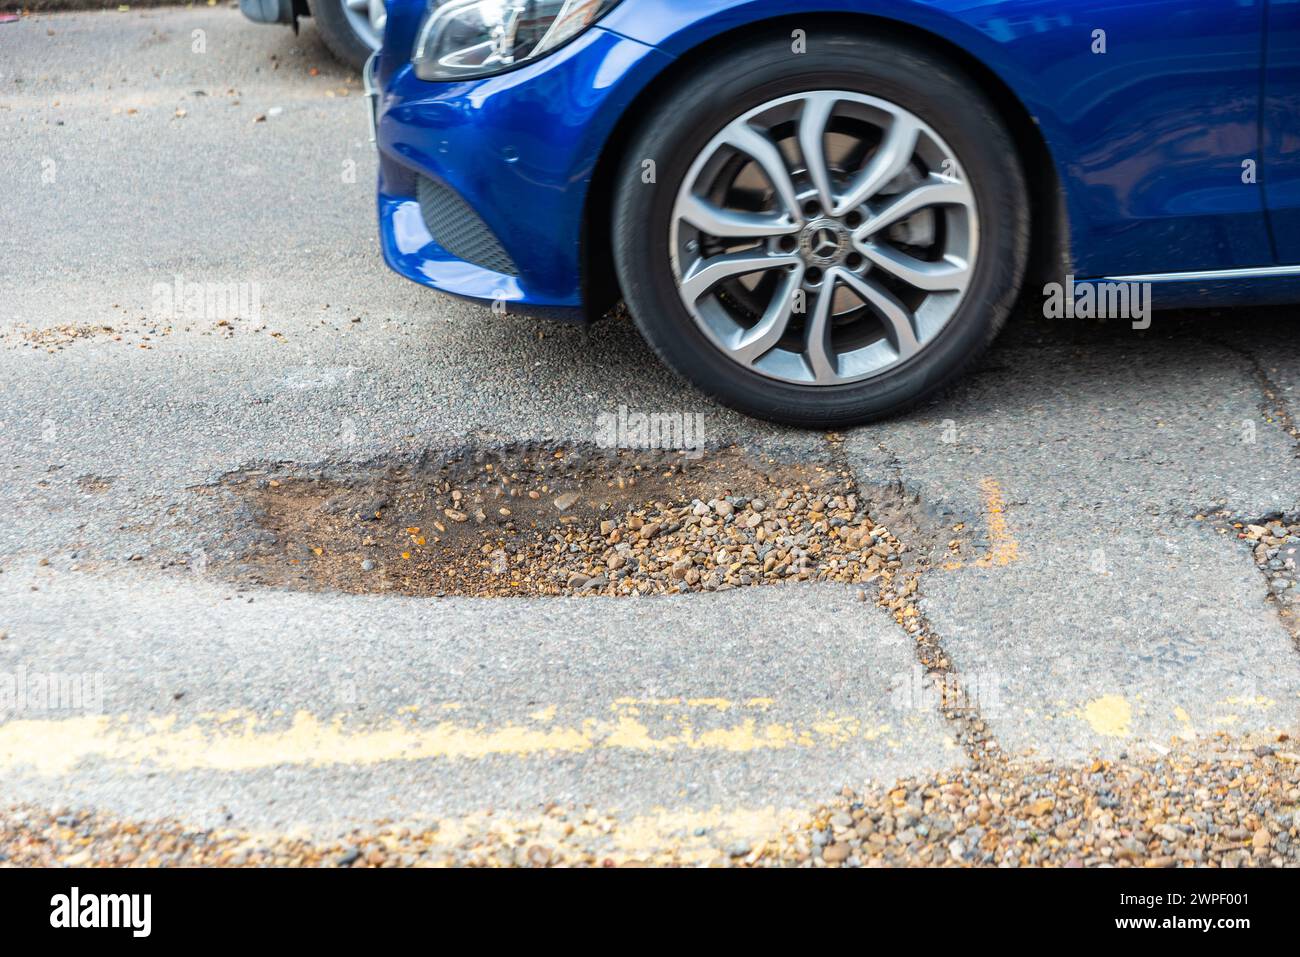 Large pothole in a road in Westcliff on Sea, Southend, Essex, UK, in need of repair. Car passing pot hole Stock Photo